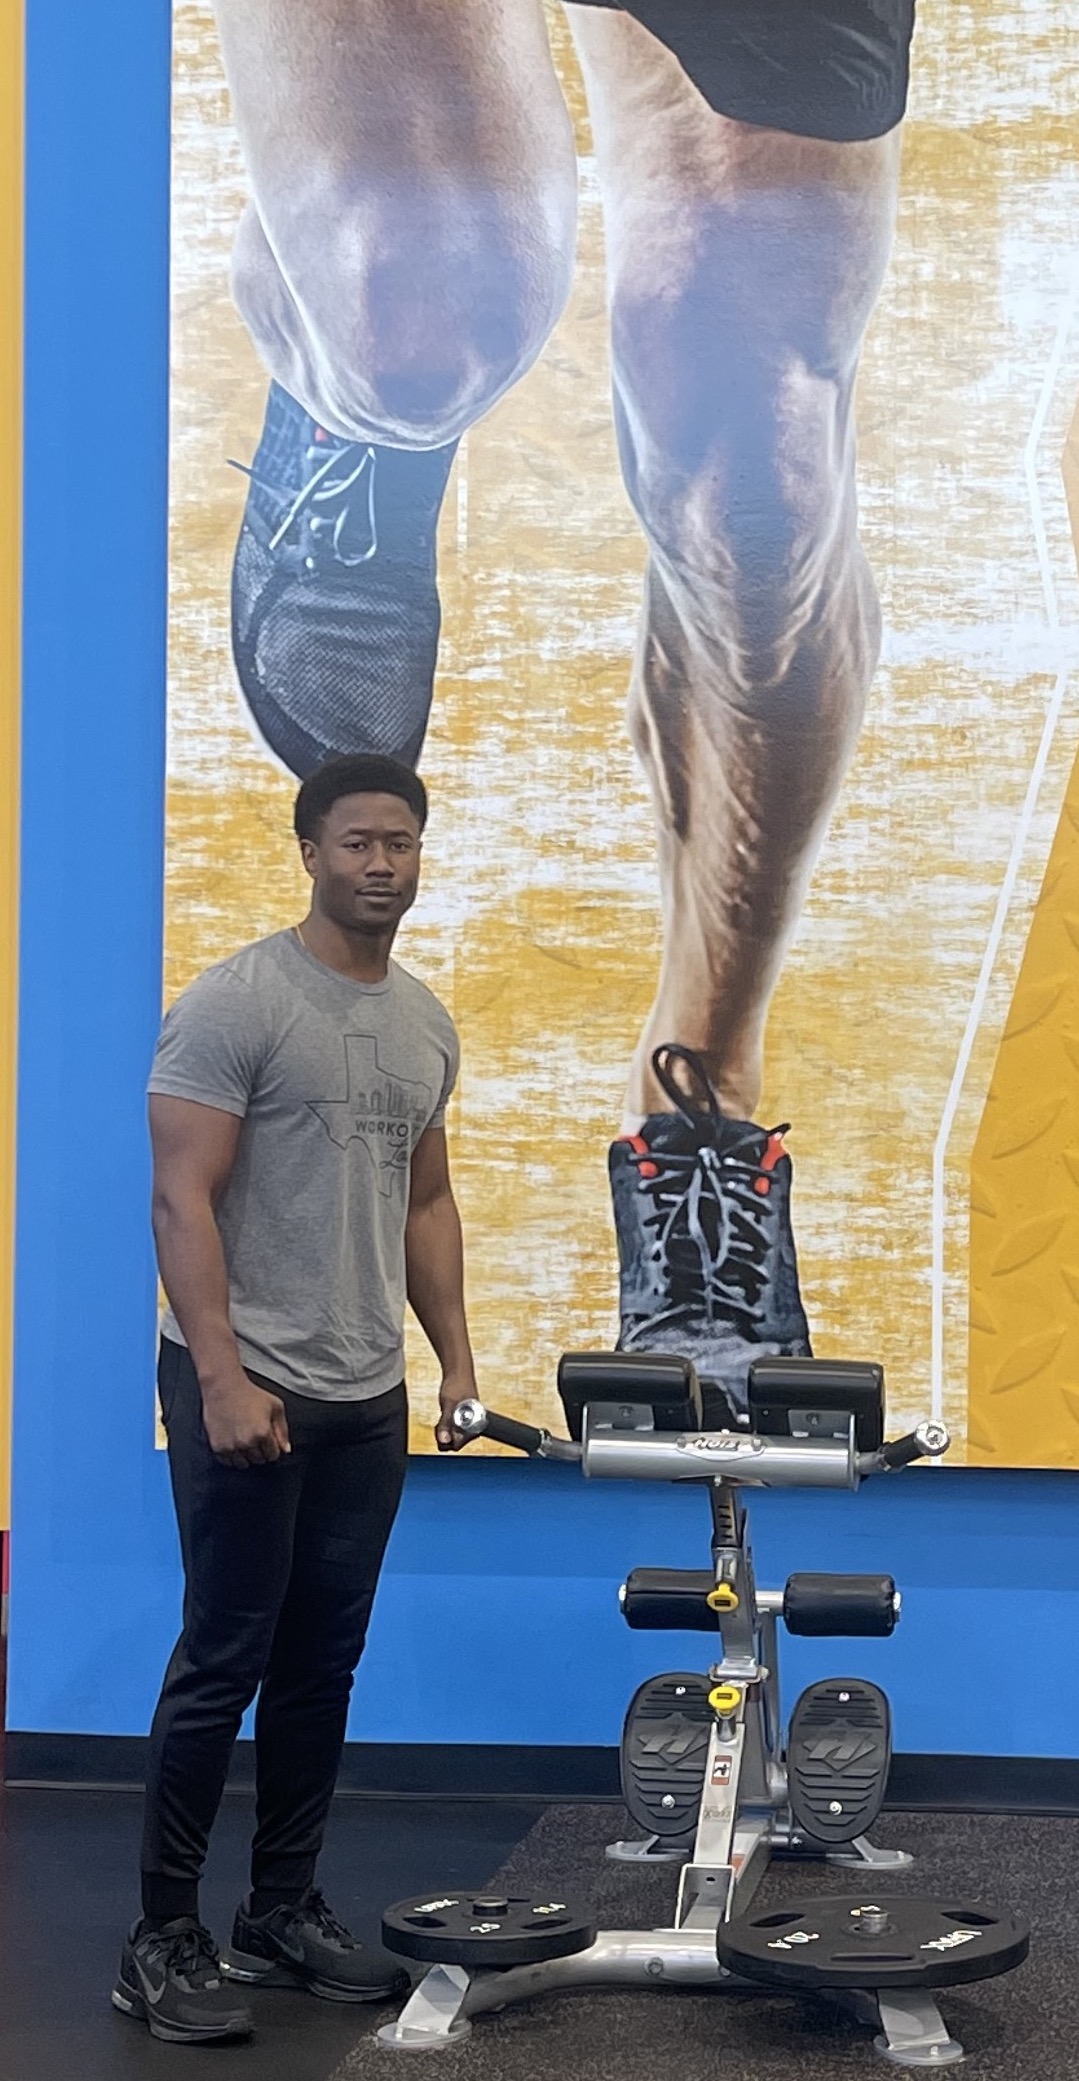 Elijah Mays, Club Manager of Fitness Connection Mission Bend